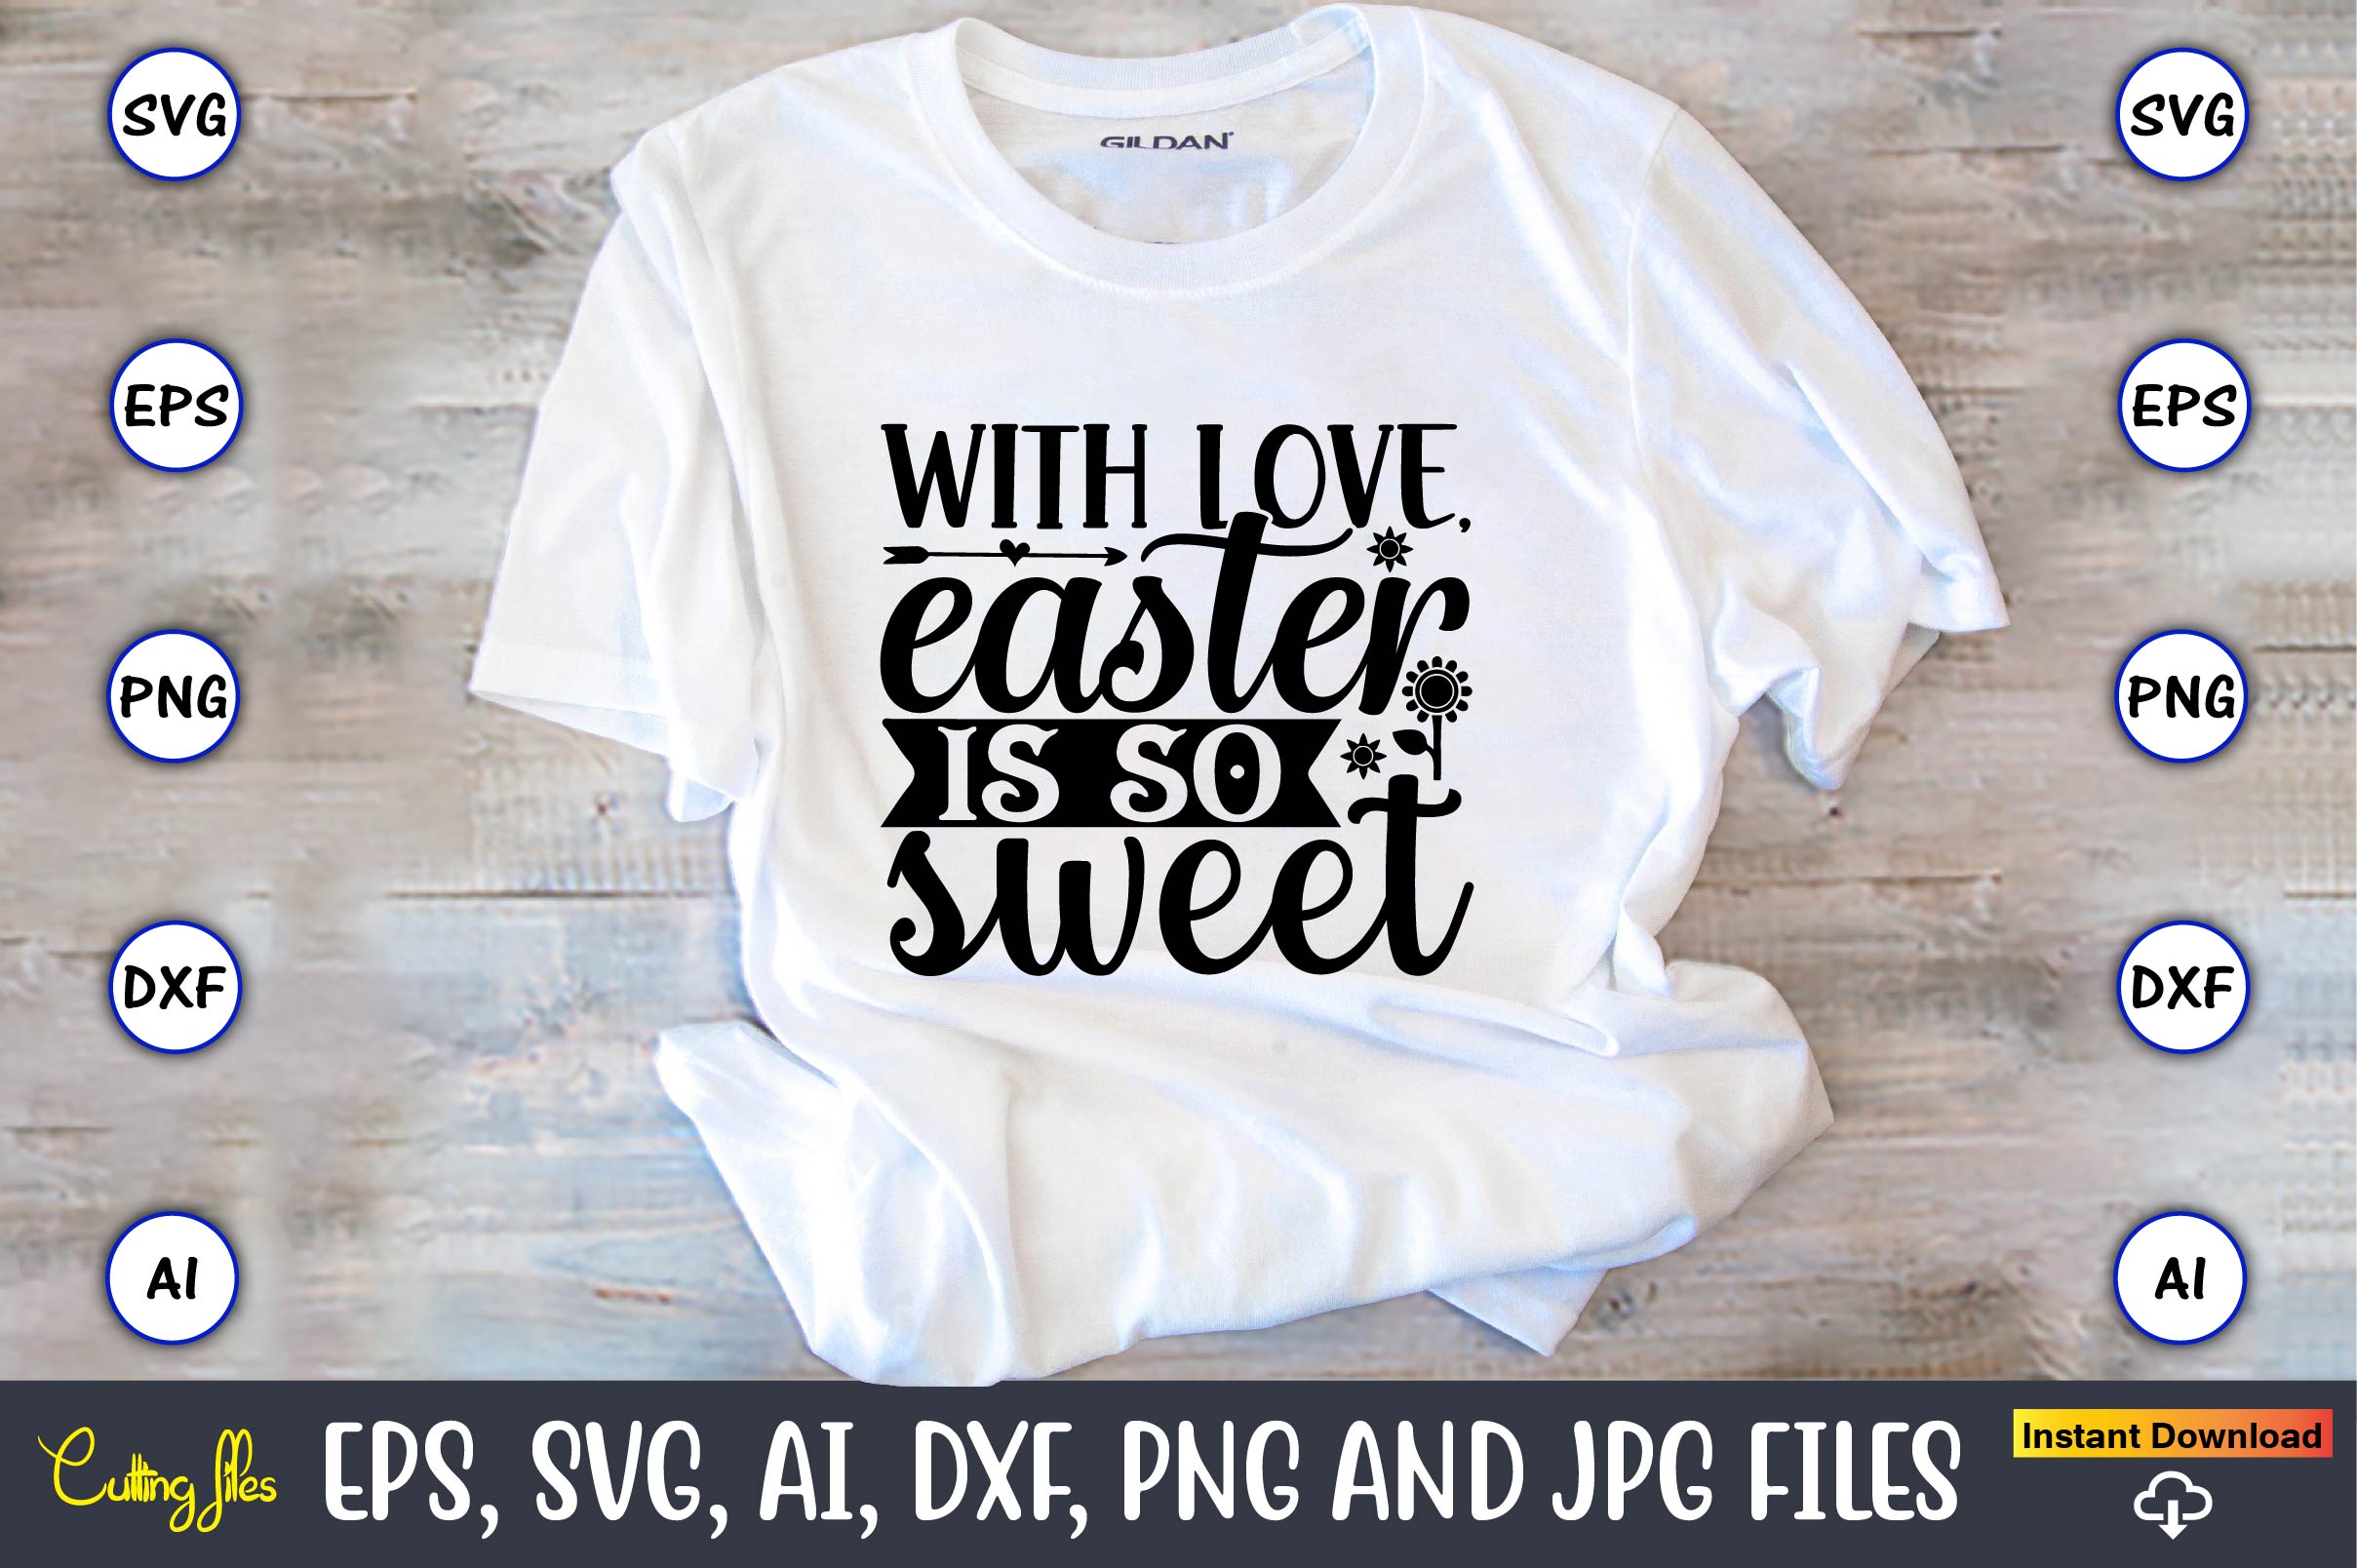 Image of a white t-shirt with an amazing inscription With love, easter is so sweet.